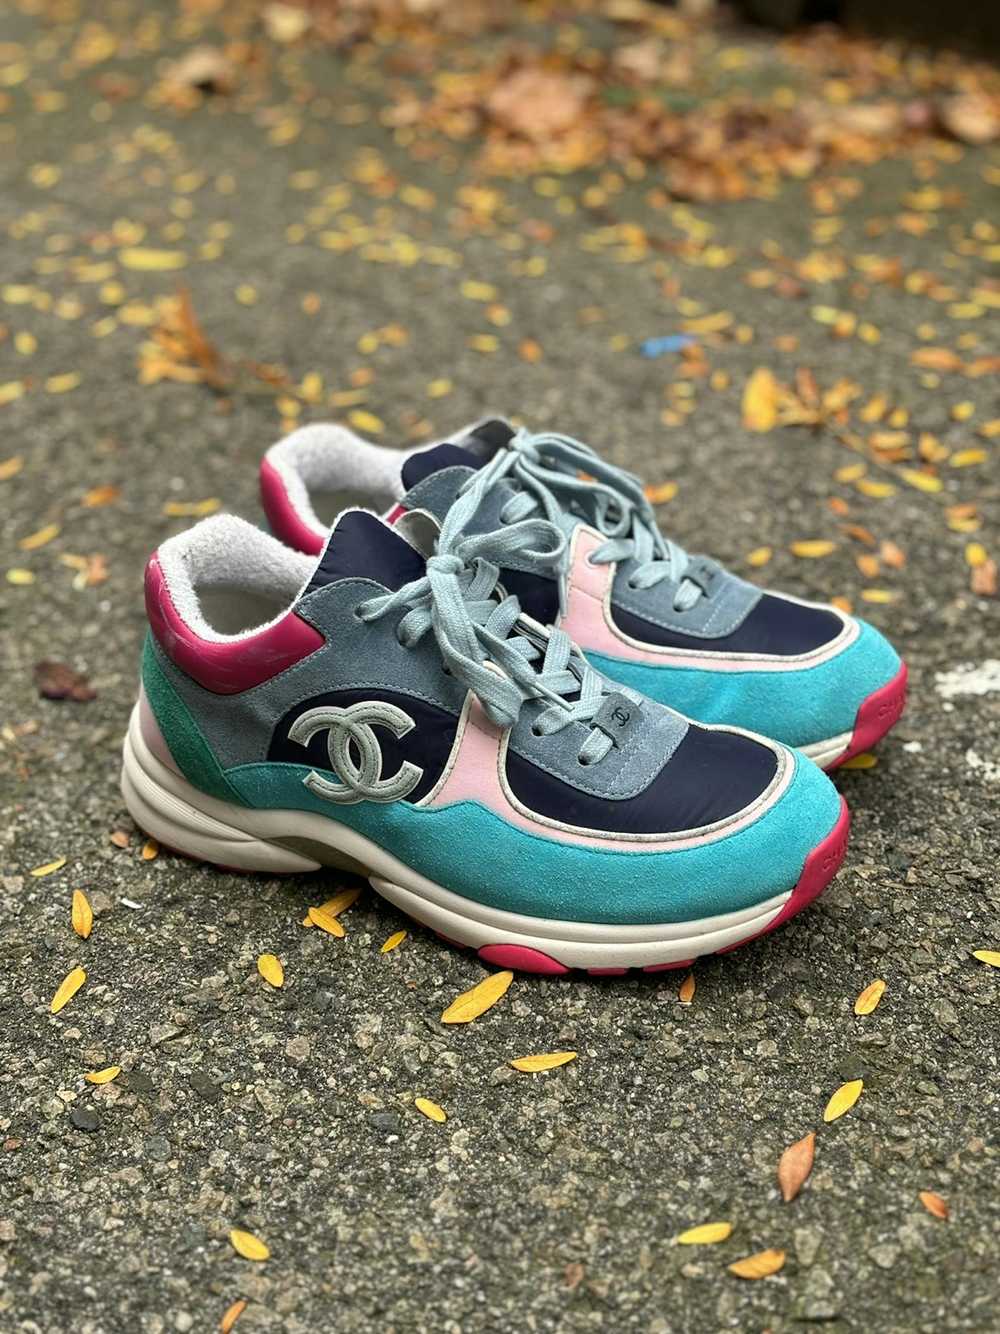 Chanel Teal and Pink CC Sneakers - image 1